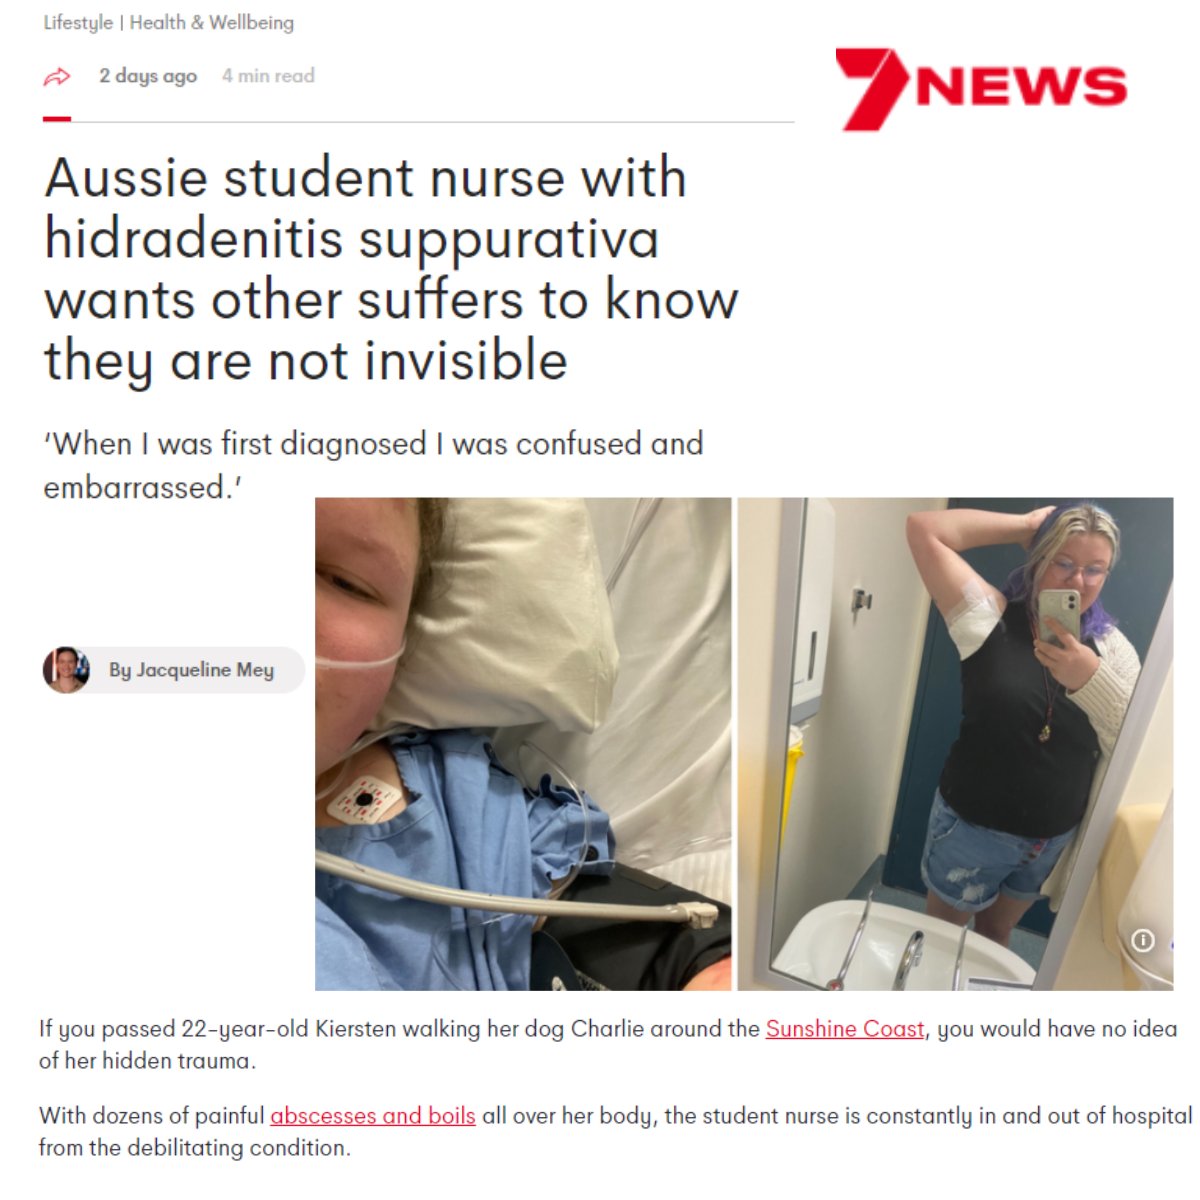 This 'Aussie student nurse with hidradenitis suppurativa wants other suffers to know they are not invisible' and we love her for it!

Read in full> see linktr.ee/HidraWear 

#hidradenitissuppurativa #dermtwitter #medtwitter #dermatology